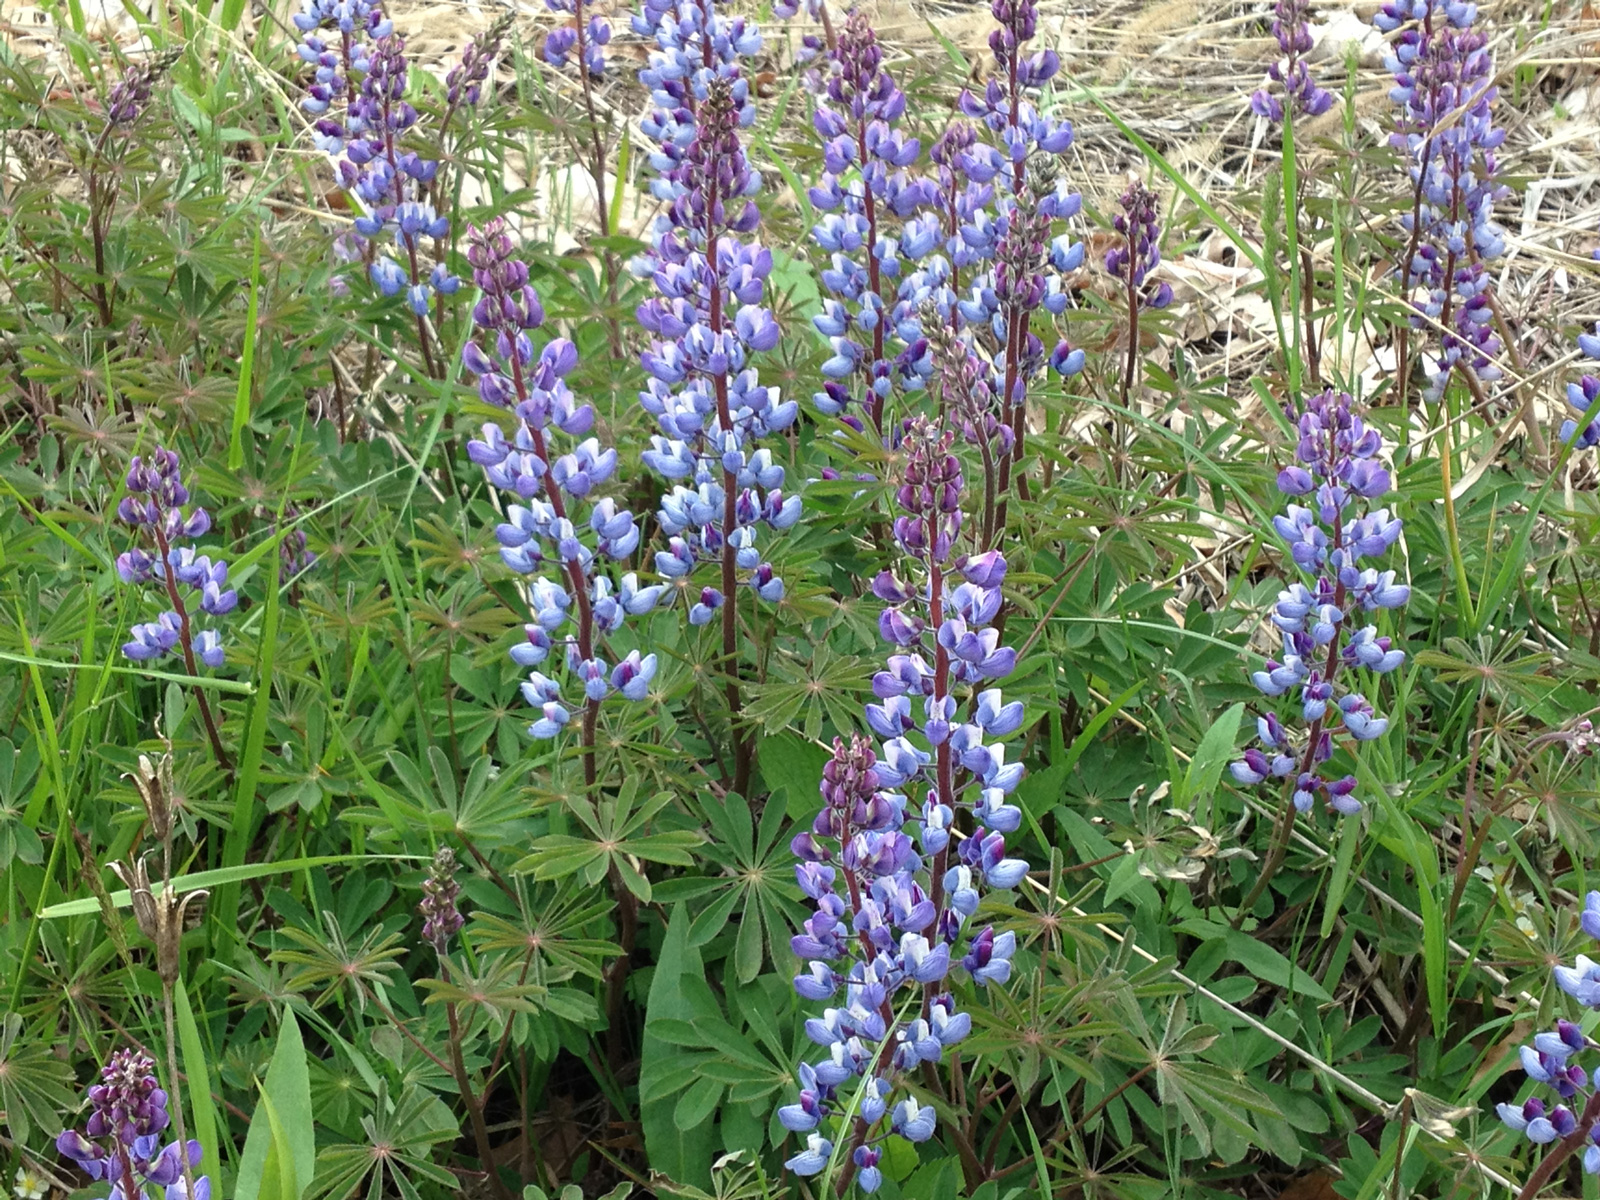 The wild lupines